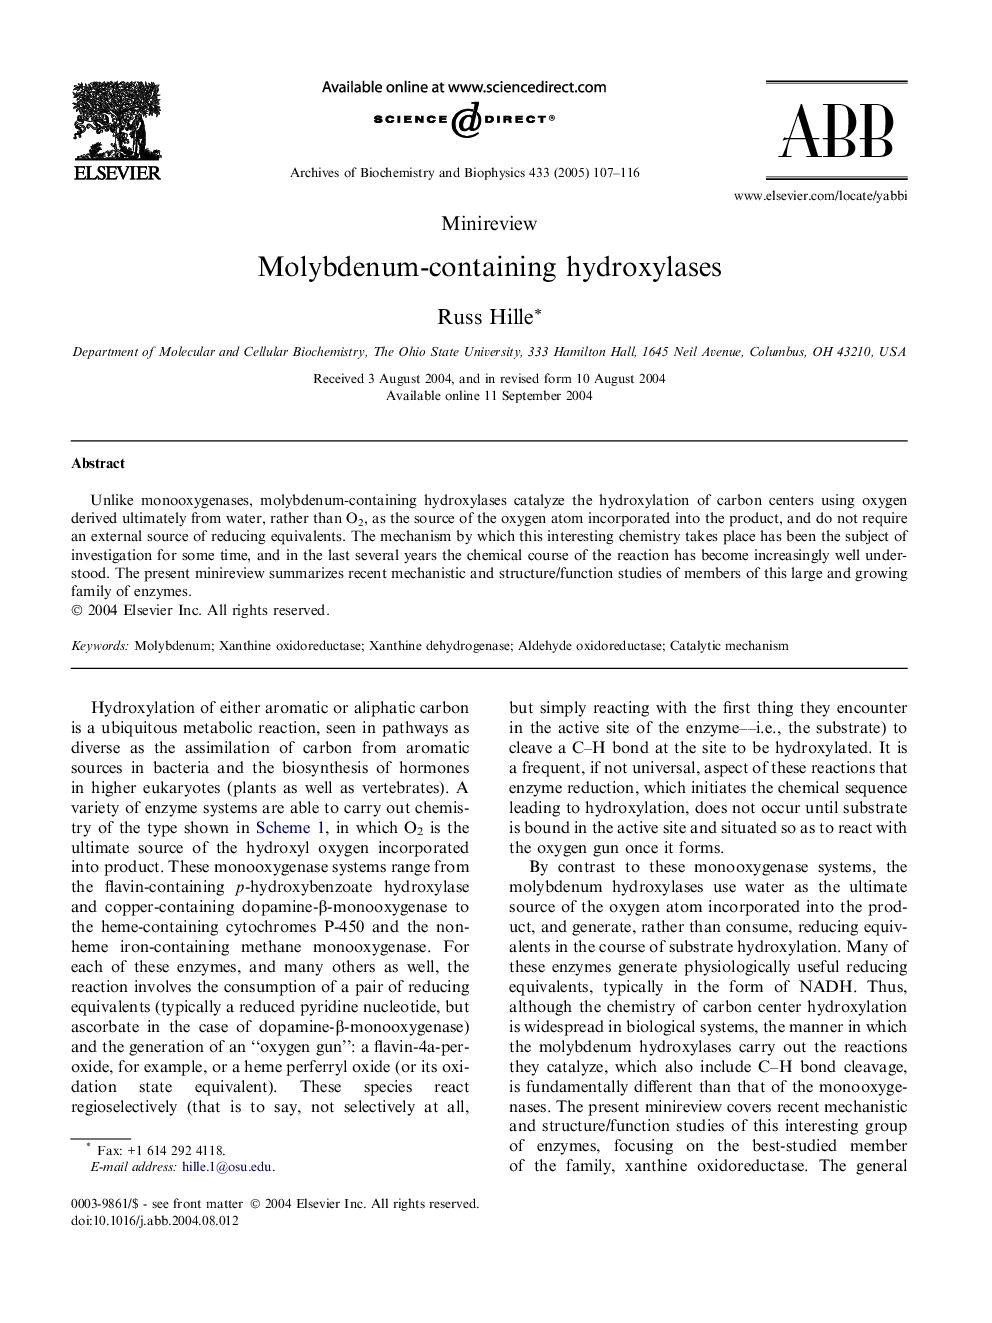 Molybdenum-containing hydroxylases